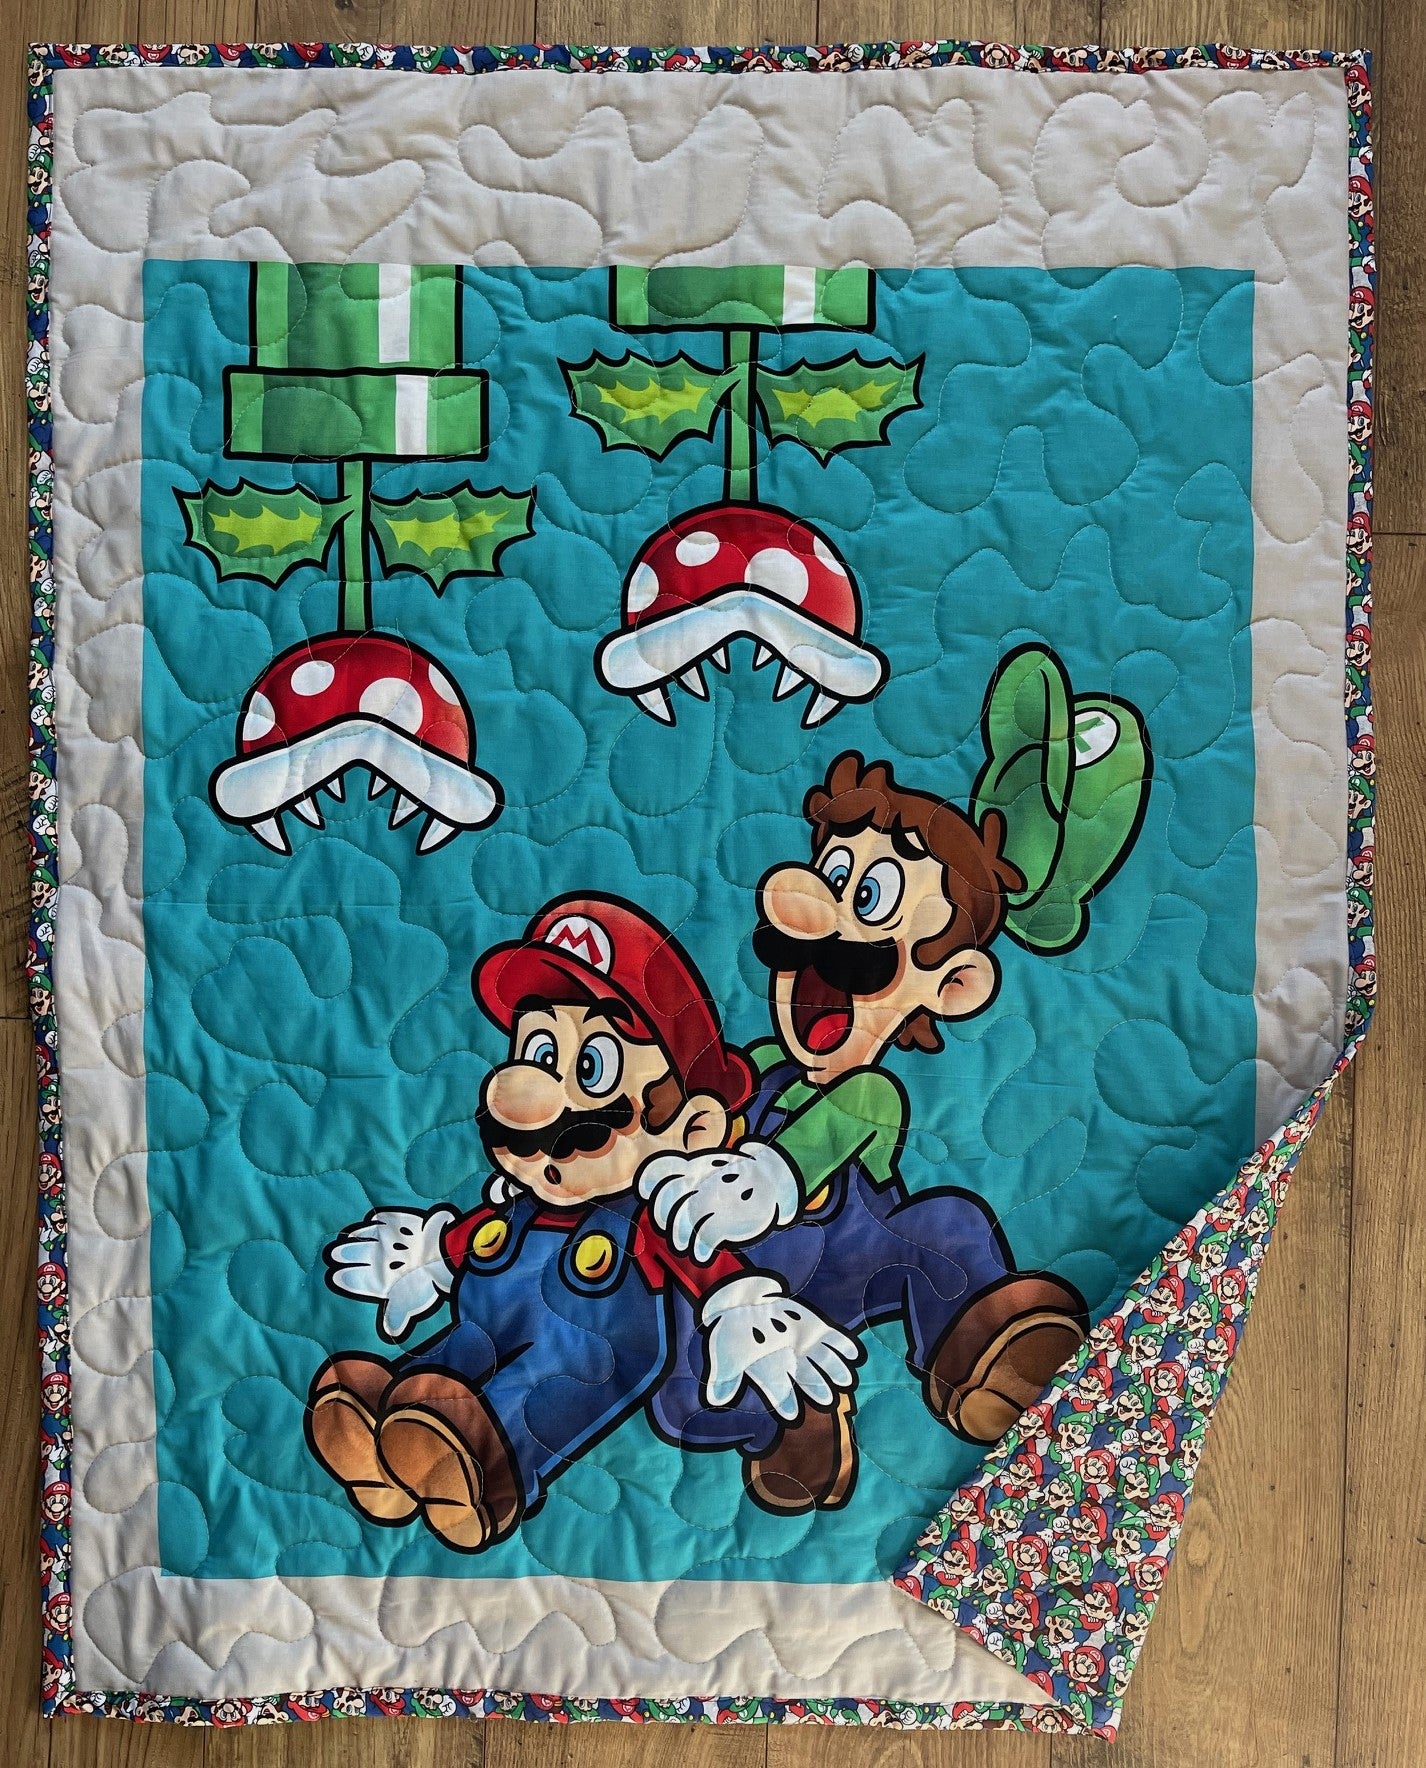 NINTENDO SUPER MARIO BROTHERS VIDEO GAME MARIO AND LUIGI INSPIRED QUILTED BLANKET